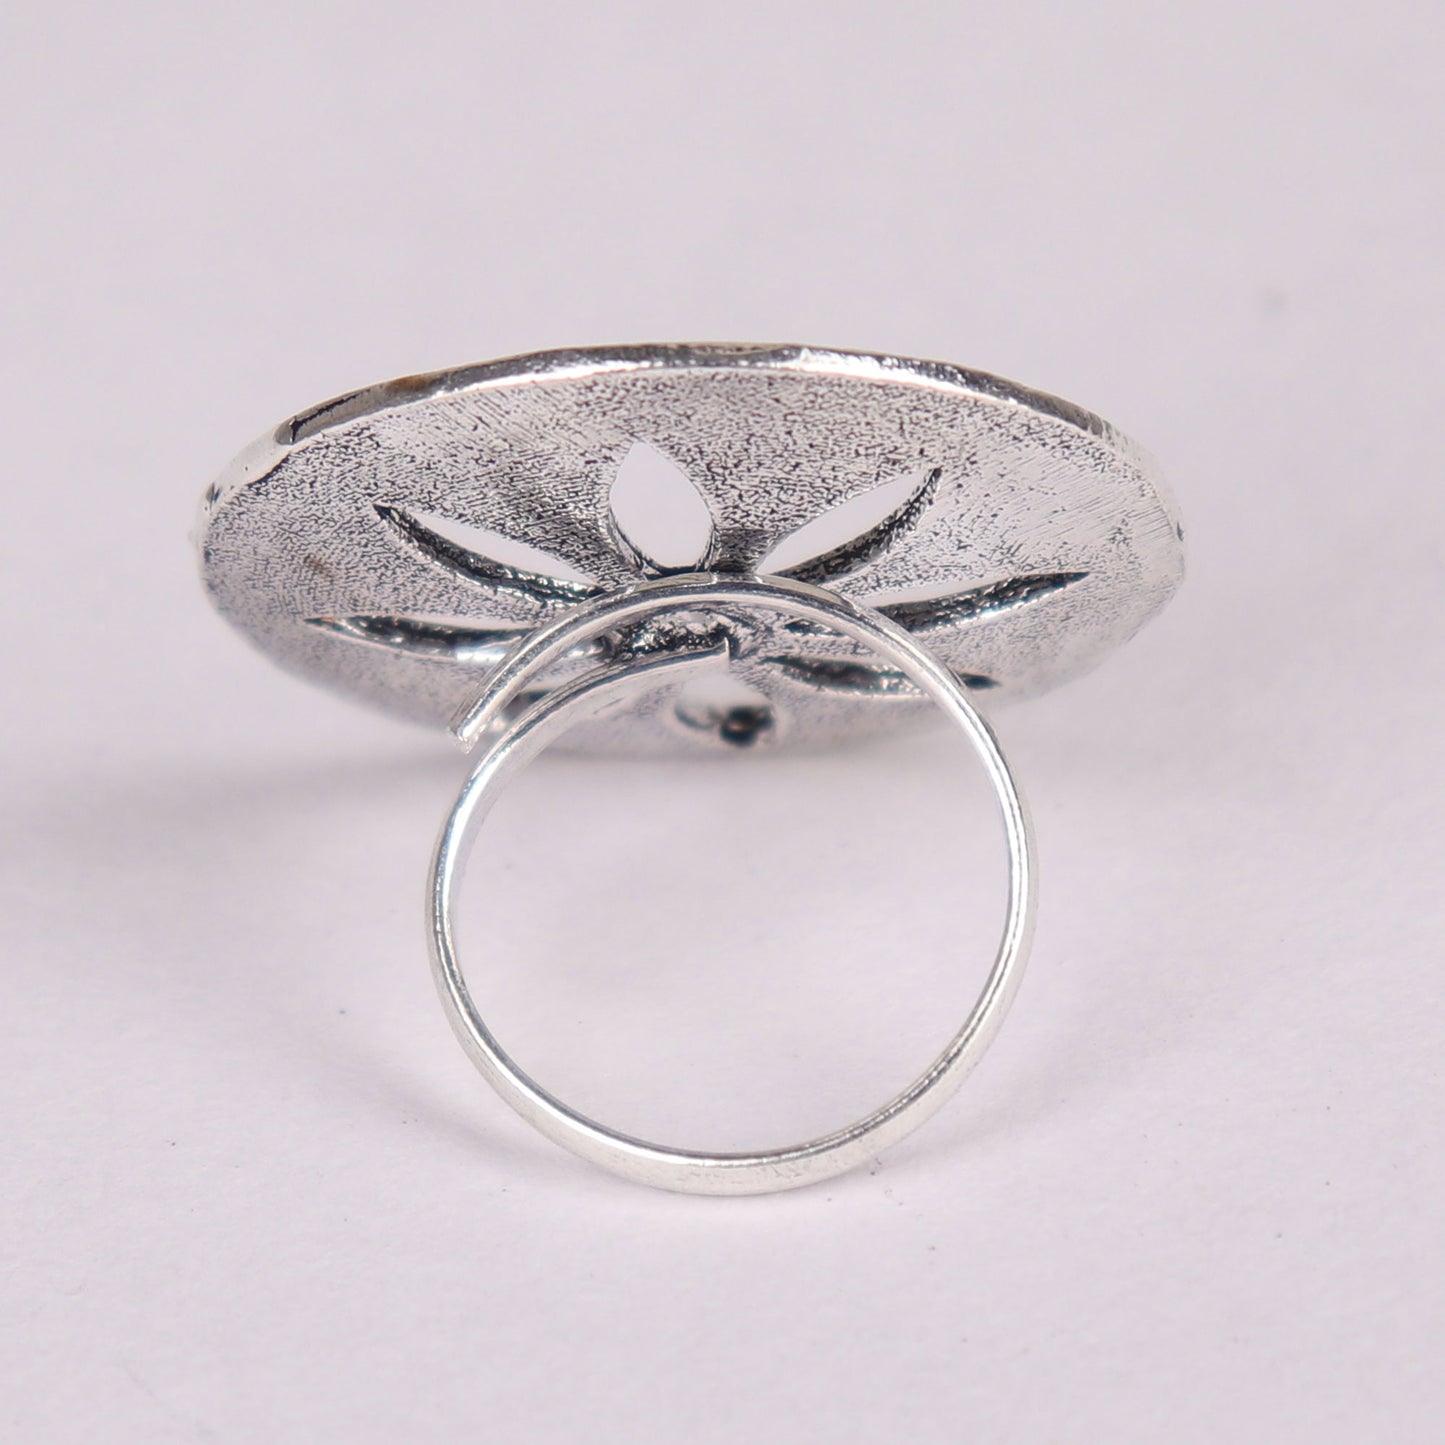 Ring,The see through Flower Ring - Cippele Multi Store